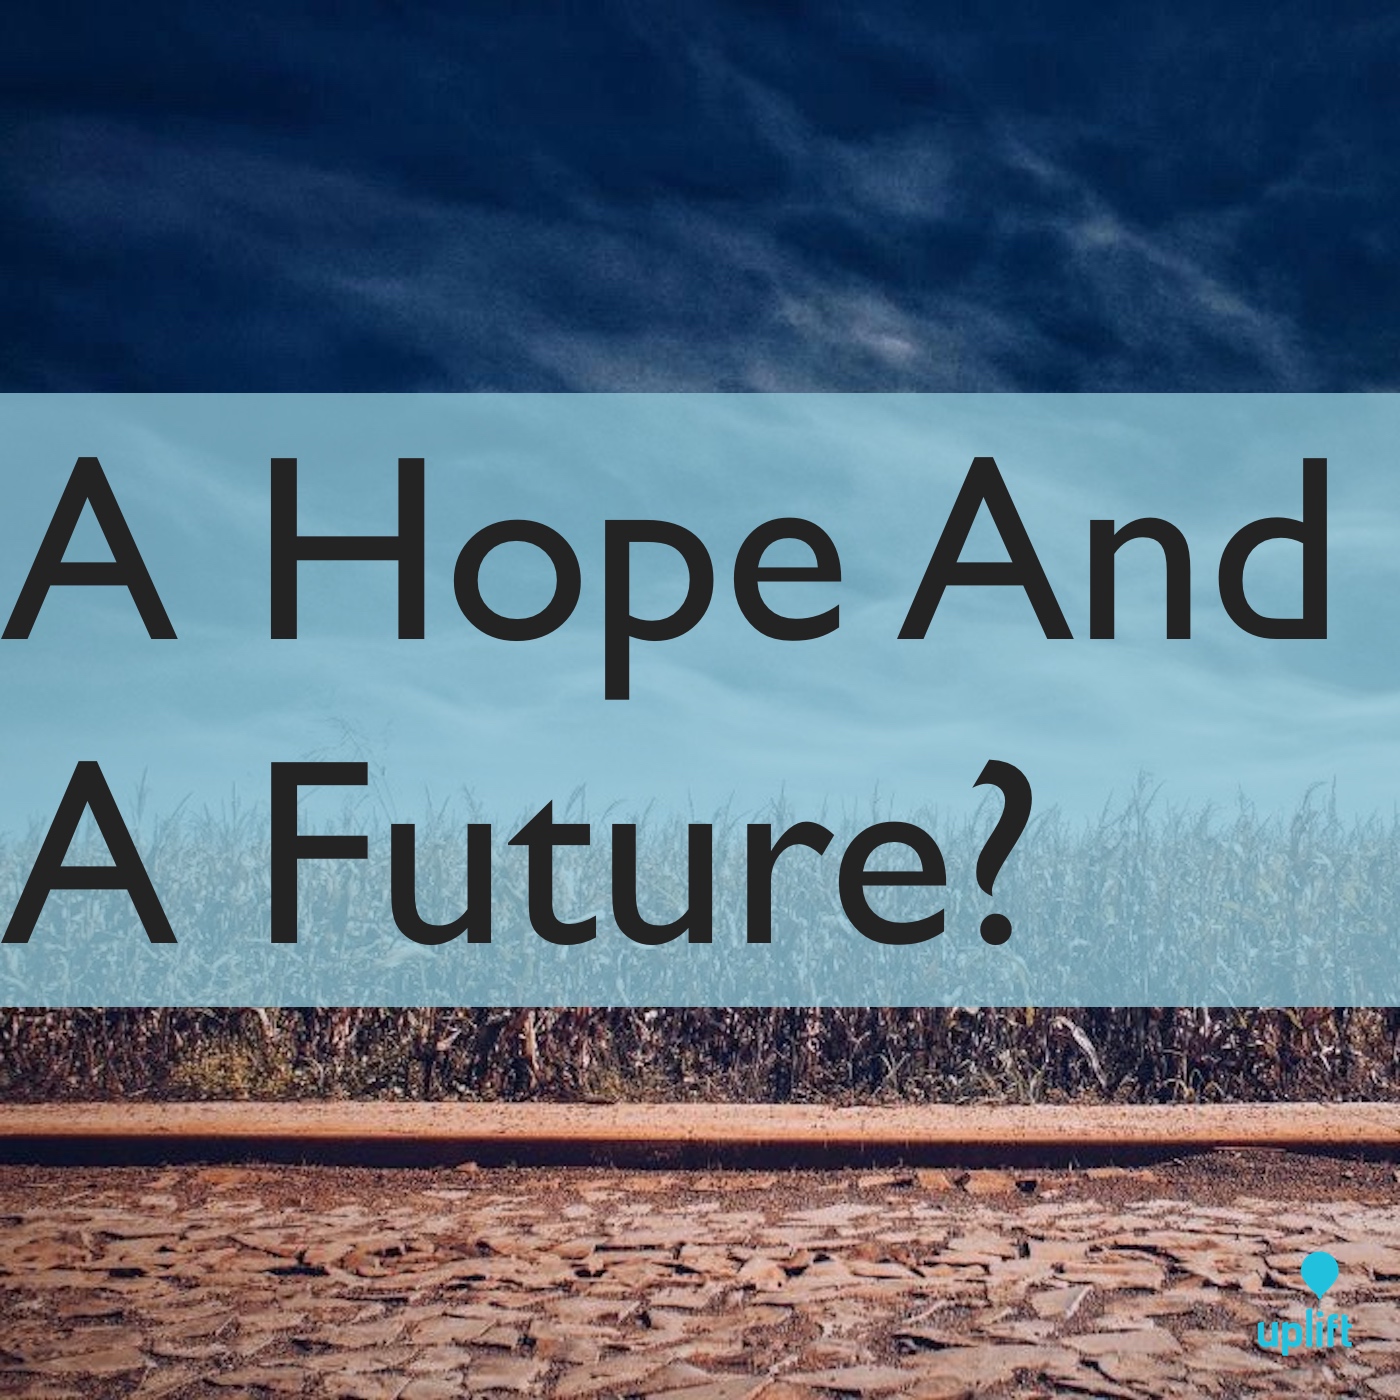 Episode 59: A Hope And A Future?